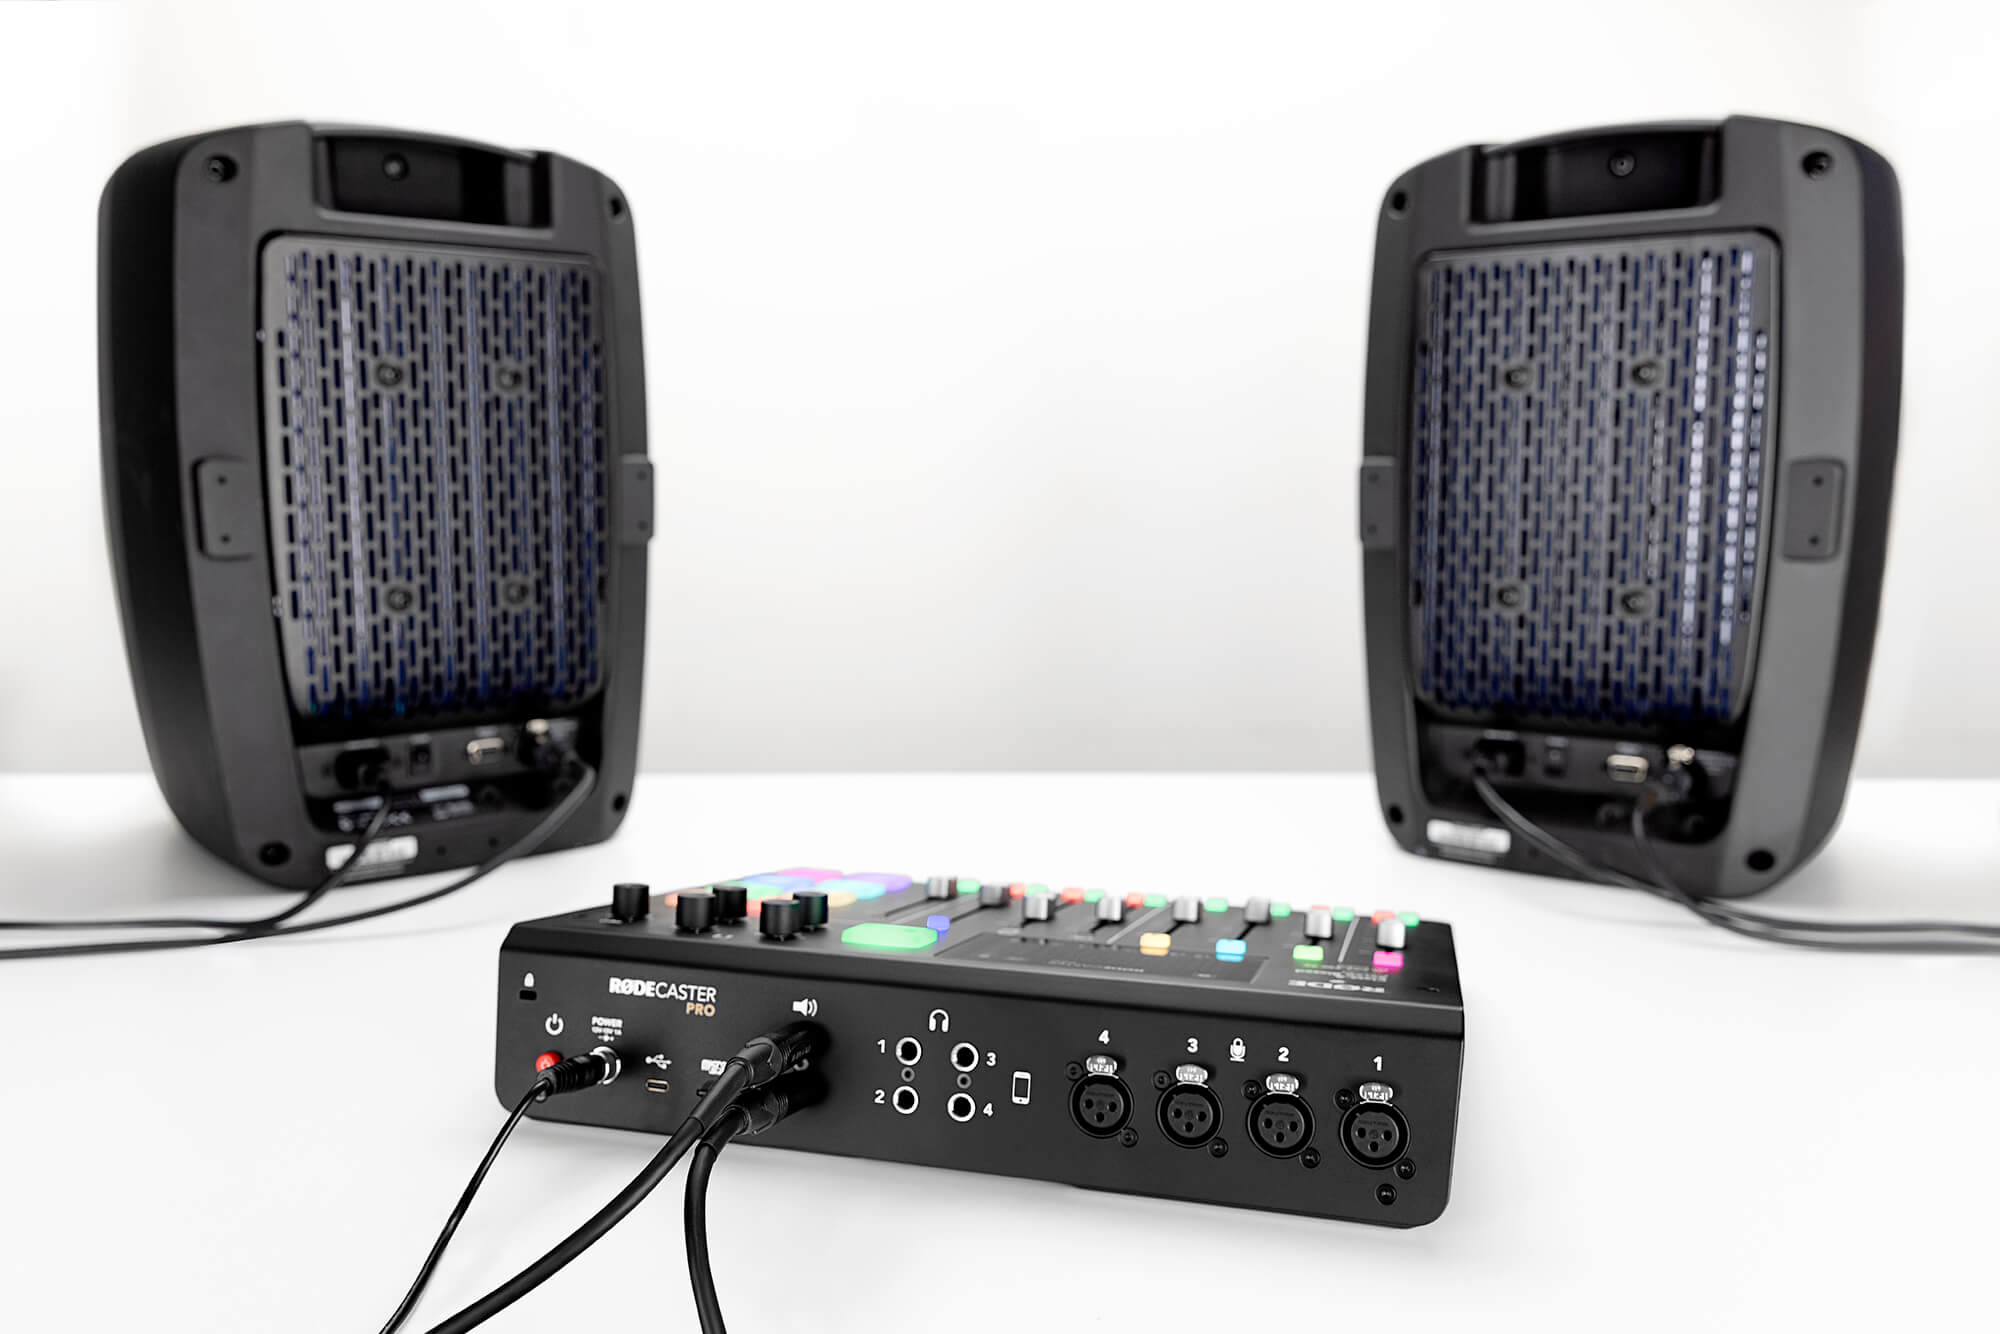 Pair of Event Opal speakers connected with TRS to XLR cables to the back of the RØDECaster Pro